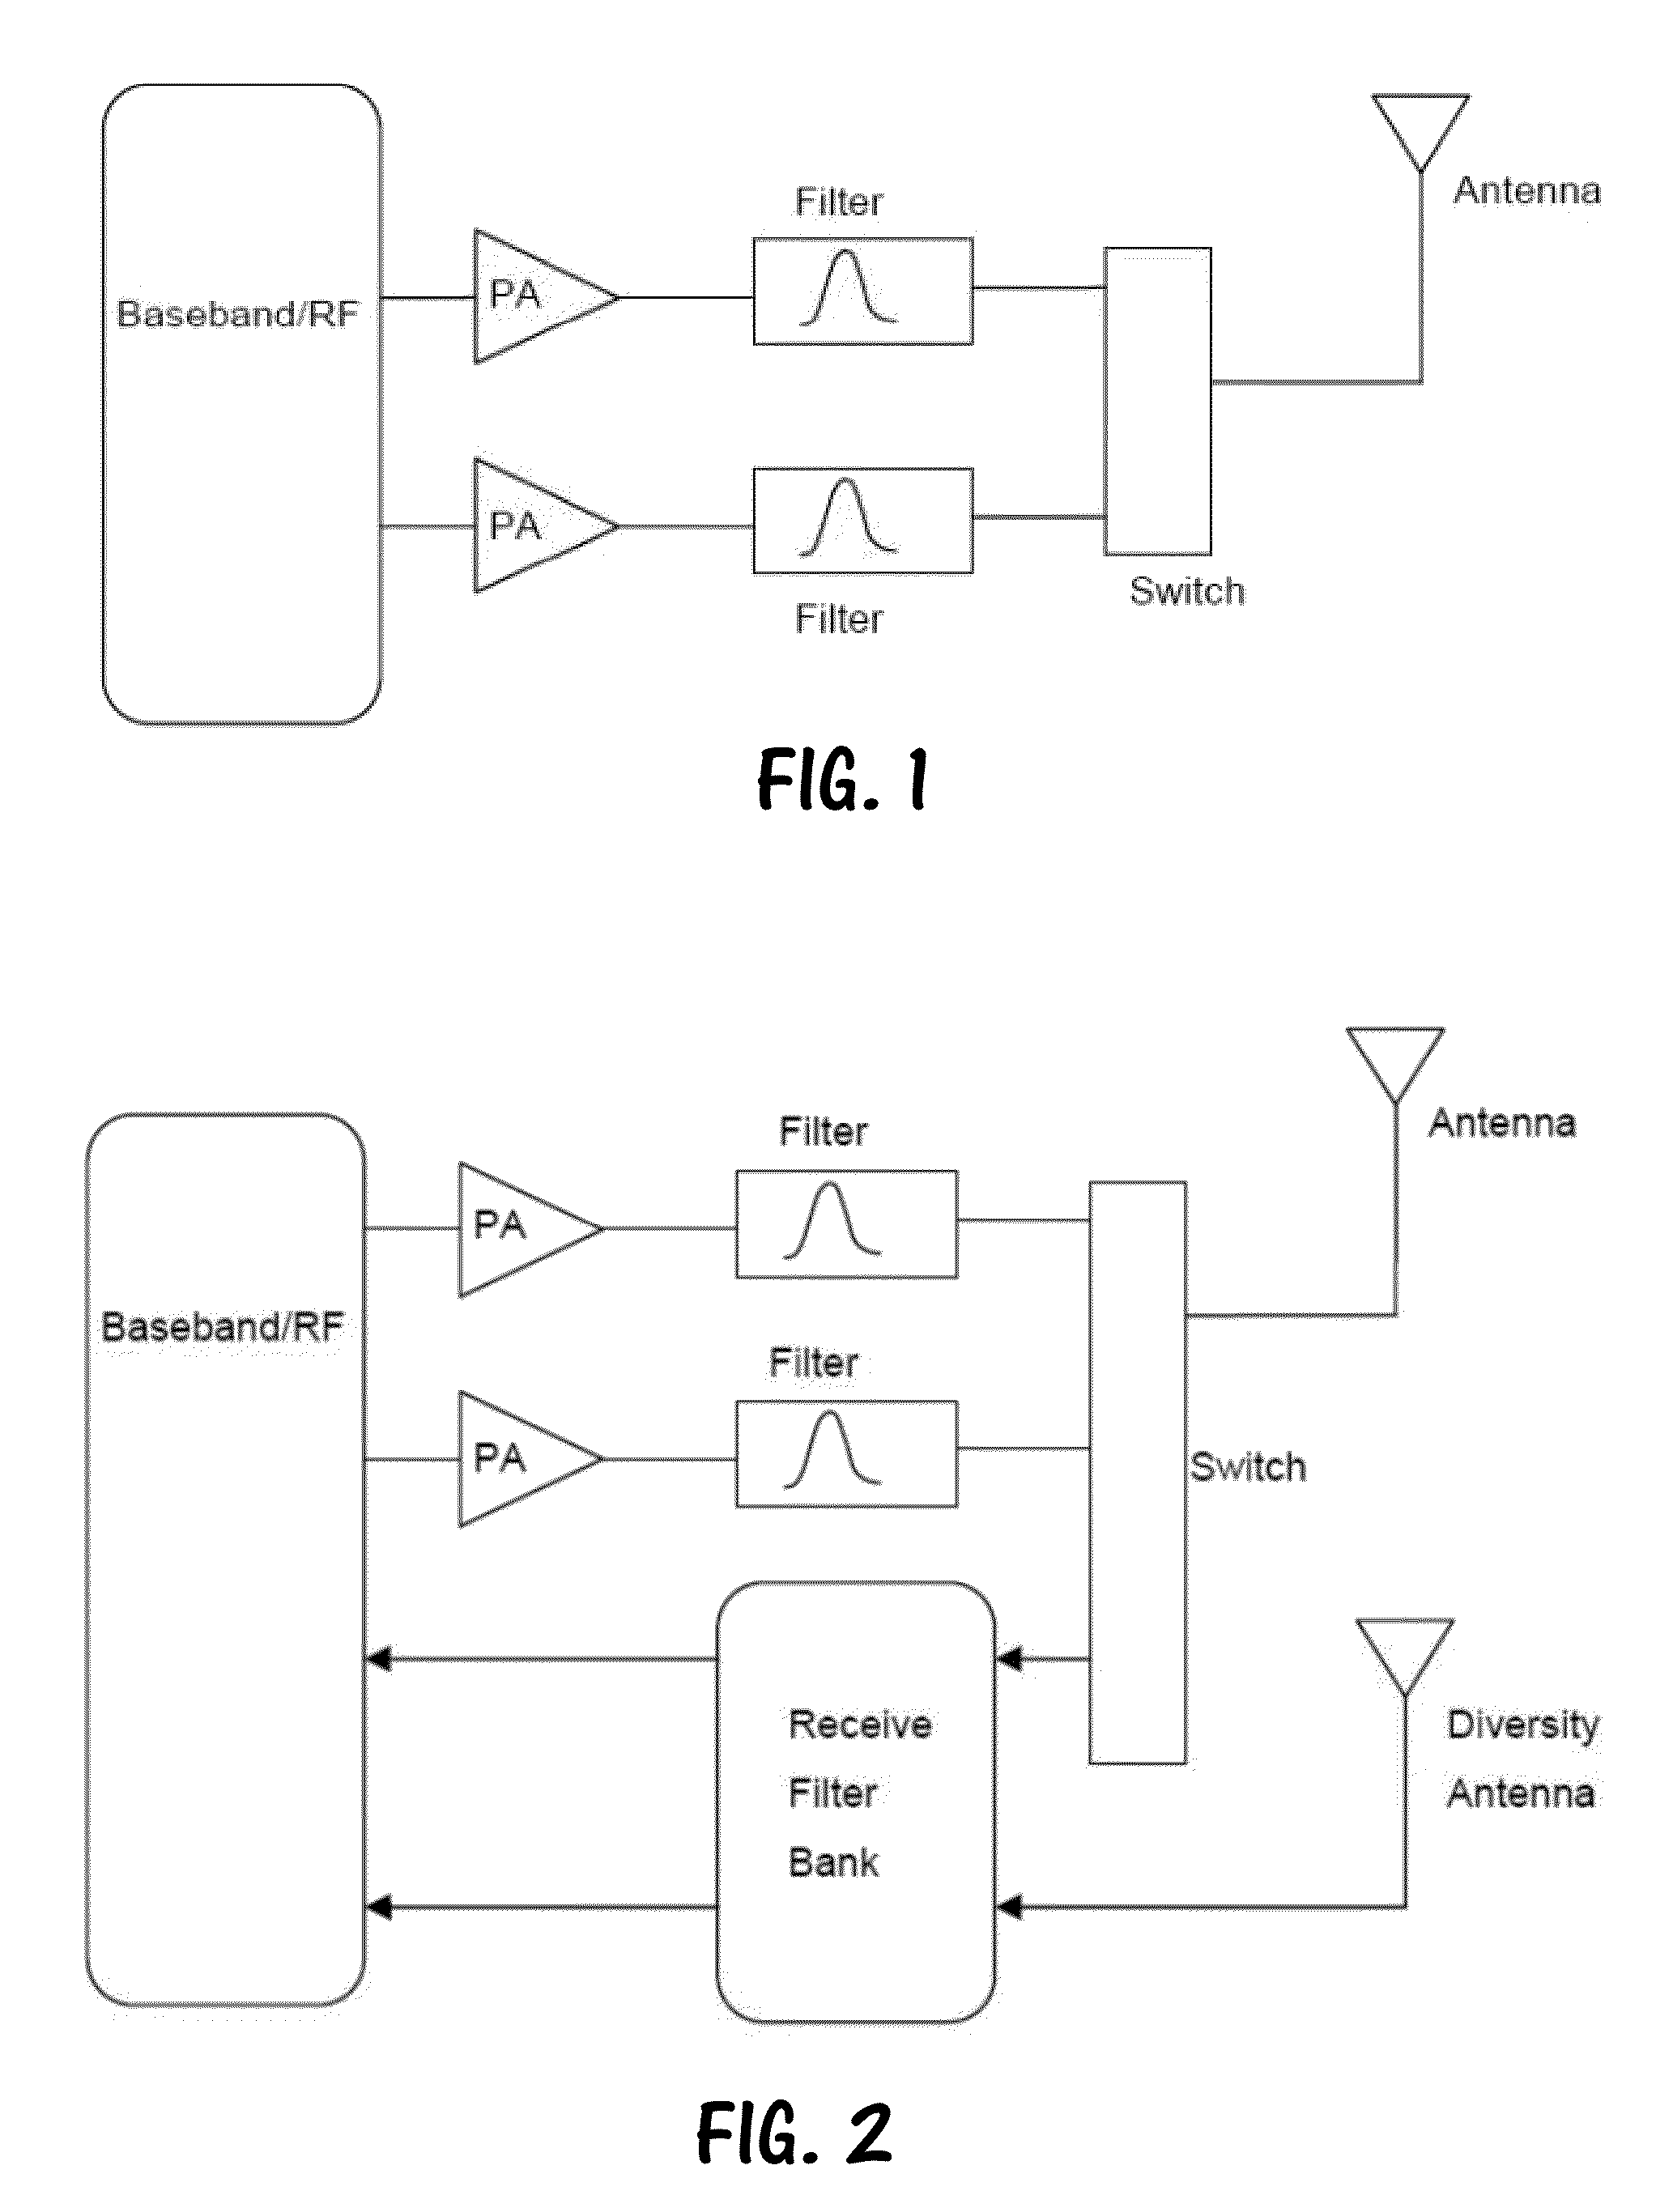 Active front end module using a modal antenna approach for improved communication system performance